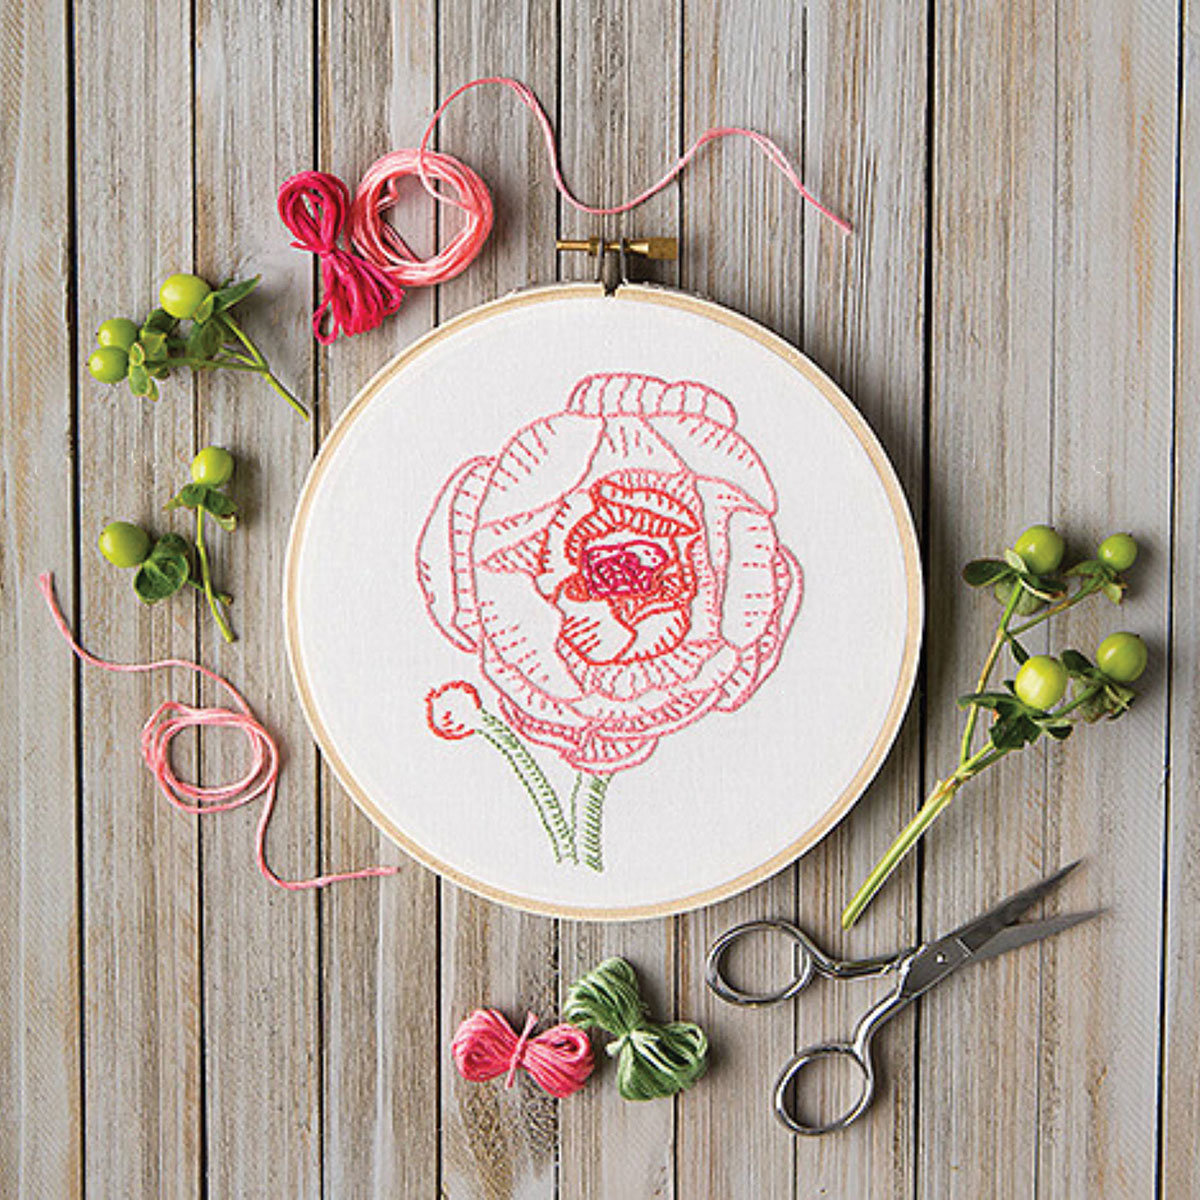 Leisure Arts Embroidery Kit 6 Coral Peony- embroidery kit for beginners -  embroidery kit for adults - cross stitch kits - cross stitch kits for  beginners - embroidery patterns 